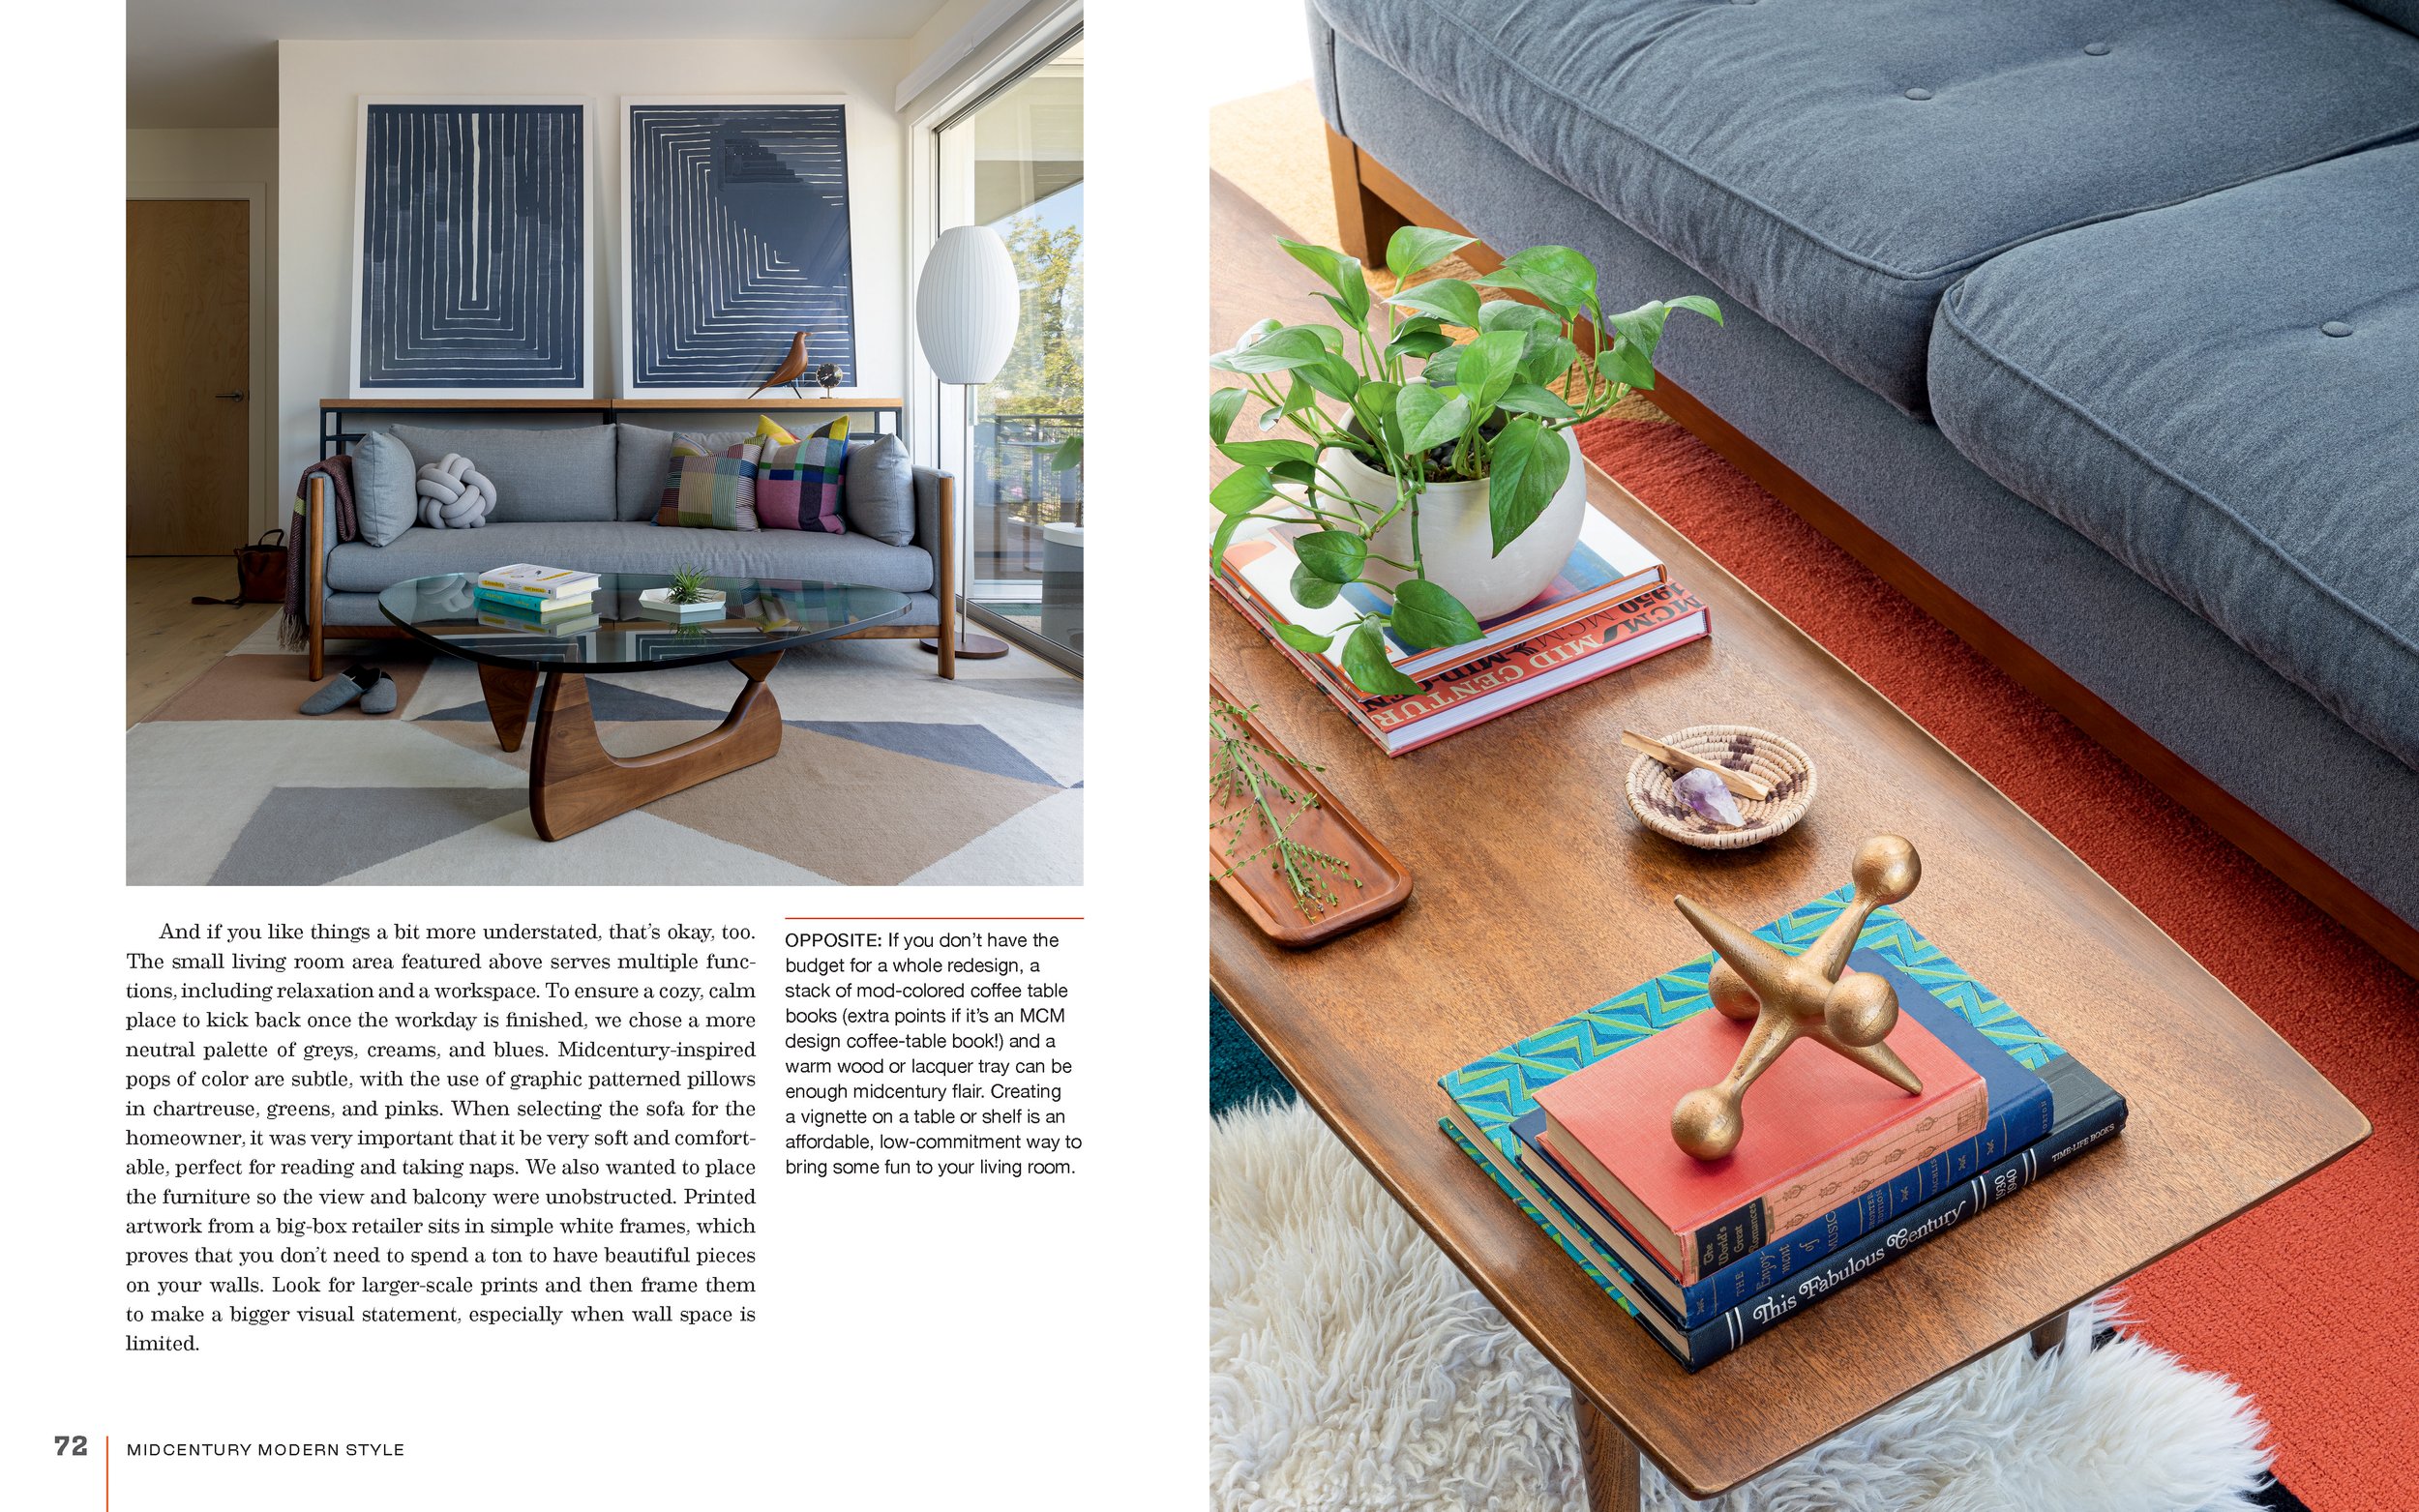 Midcentury Modern Style Book photographed by Christopher Dibble, written by  Karen Nepacena — DIBBLE